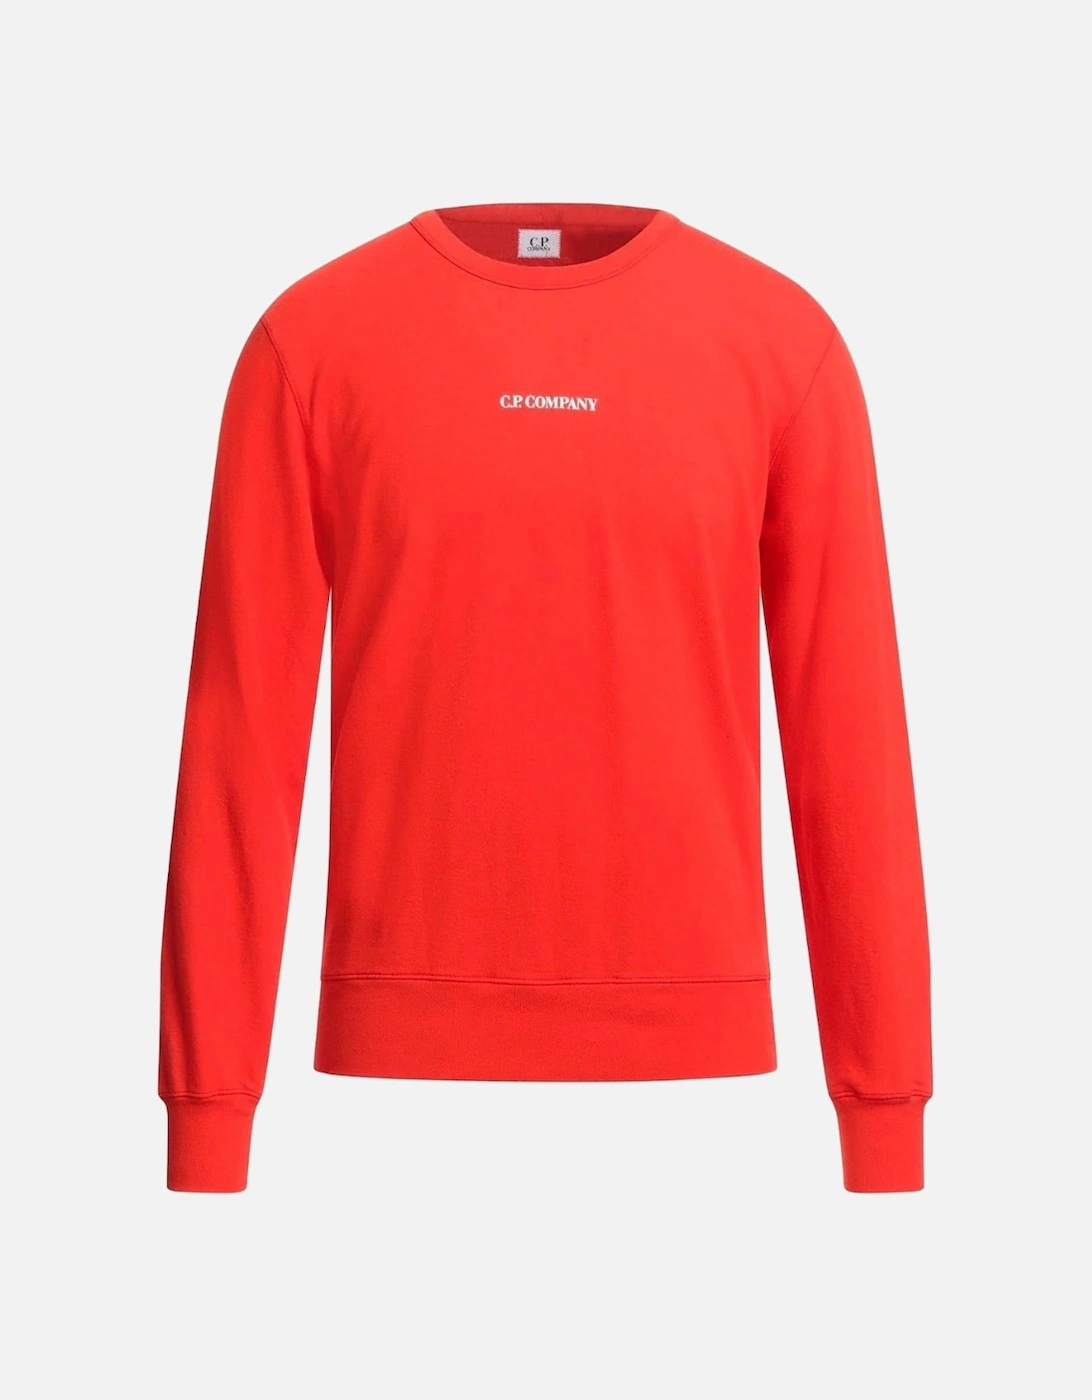 C.P. Company Brand Logo Red Jumper, 3 of 2